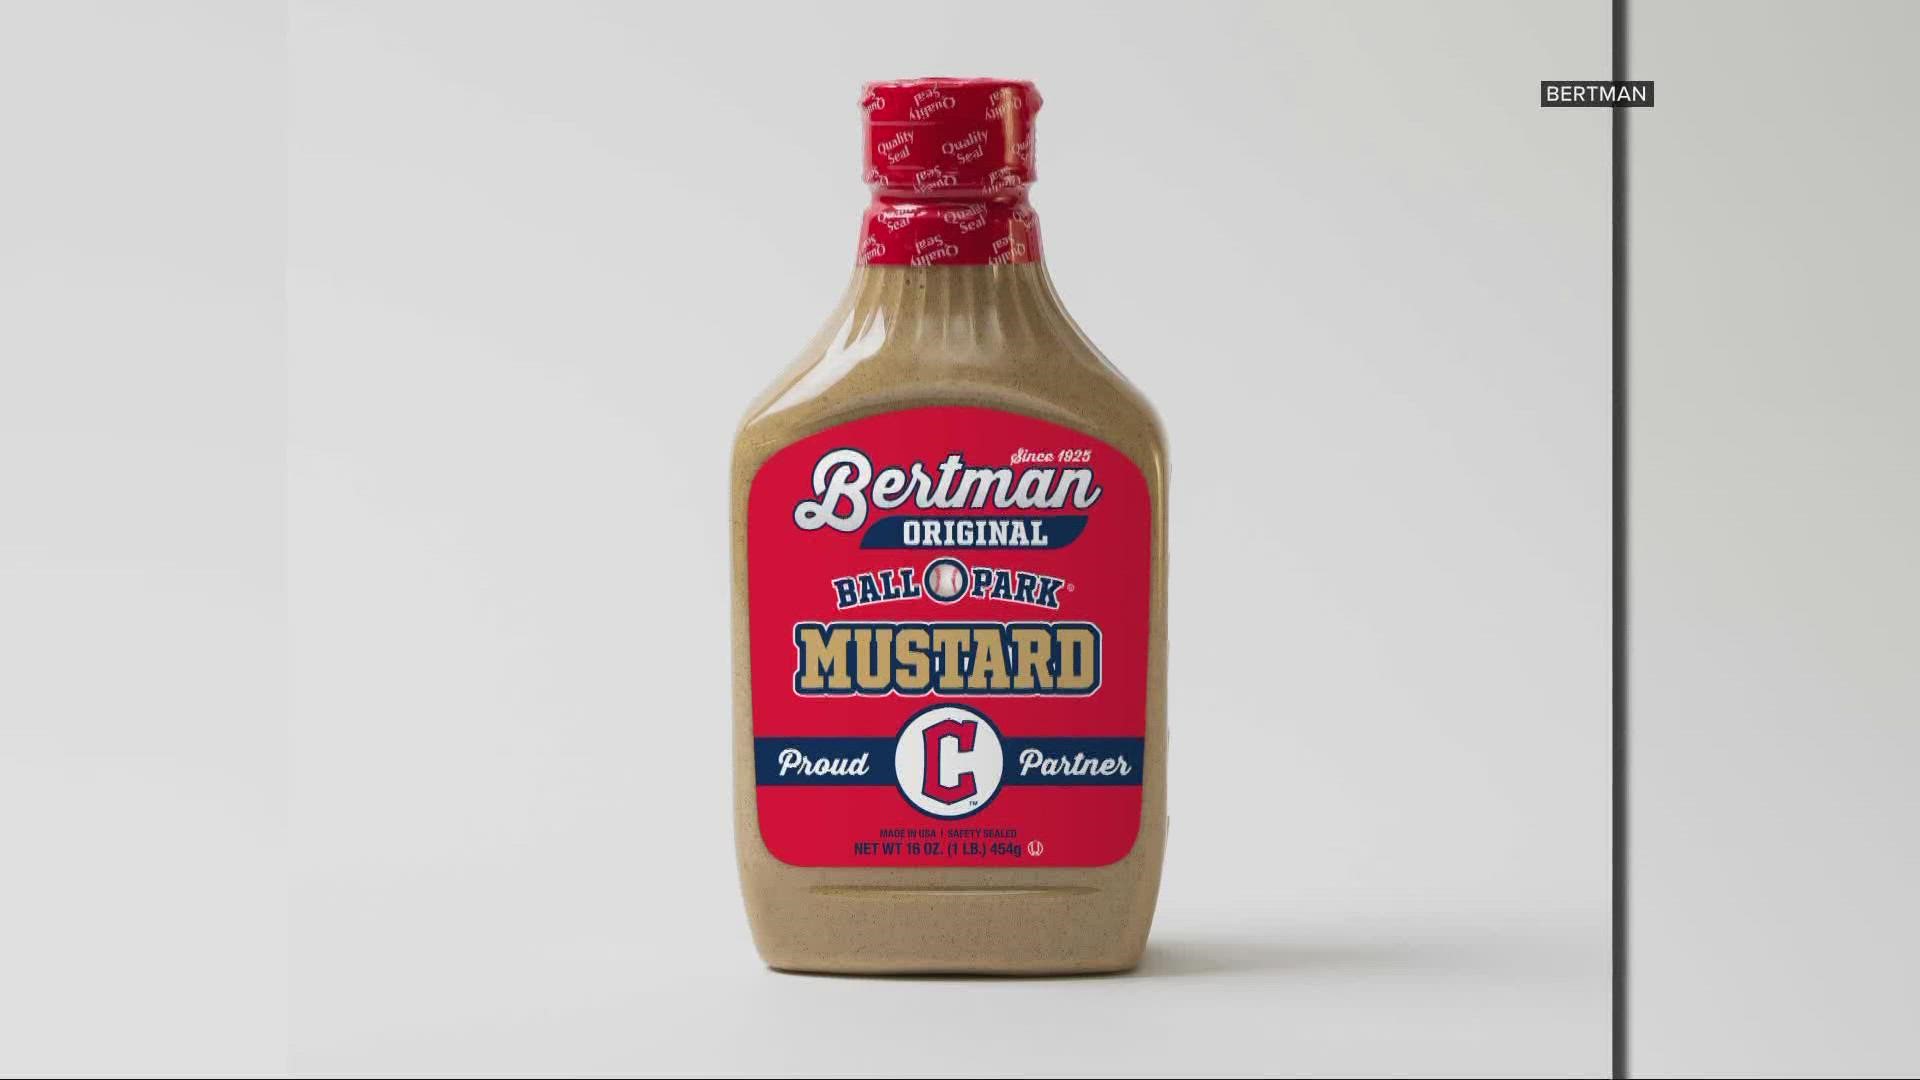 As the Cleveland Guardians prepare for the 2022 season at Progressive Field with their new team name, Bertman has given its iconic stadium mustard a fresh look.